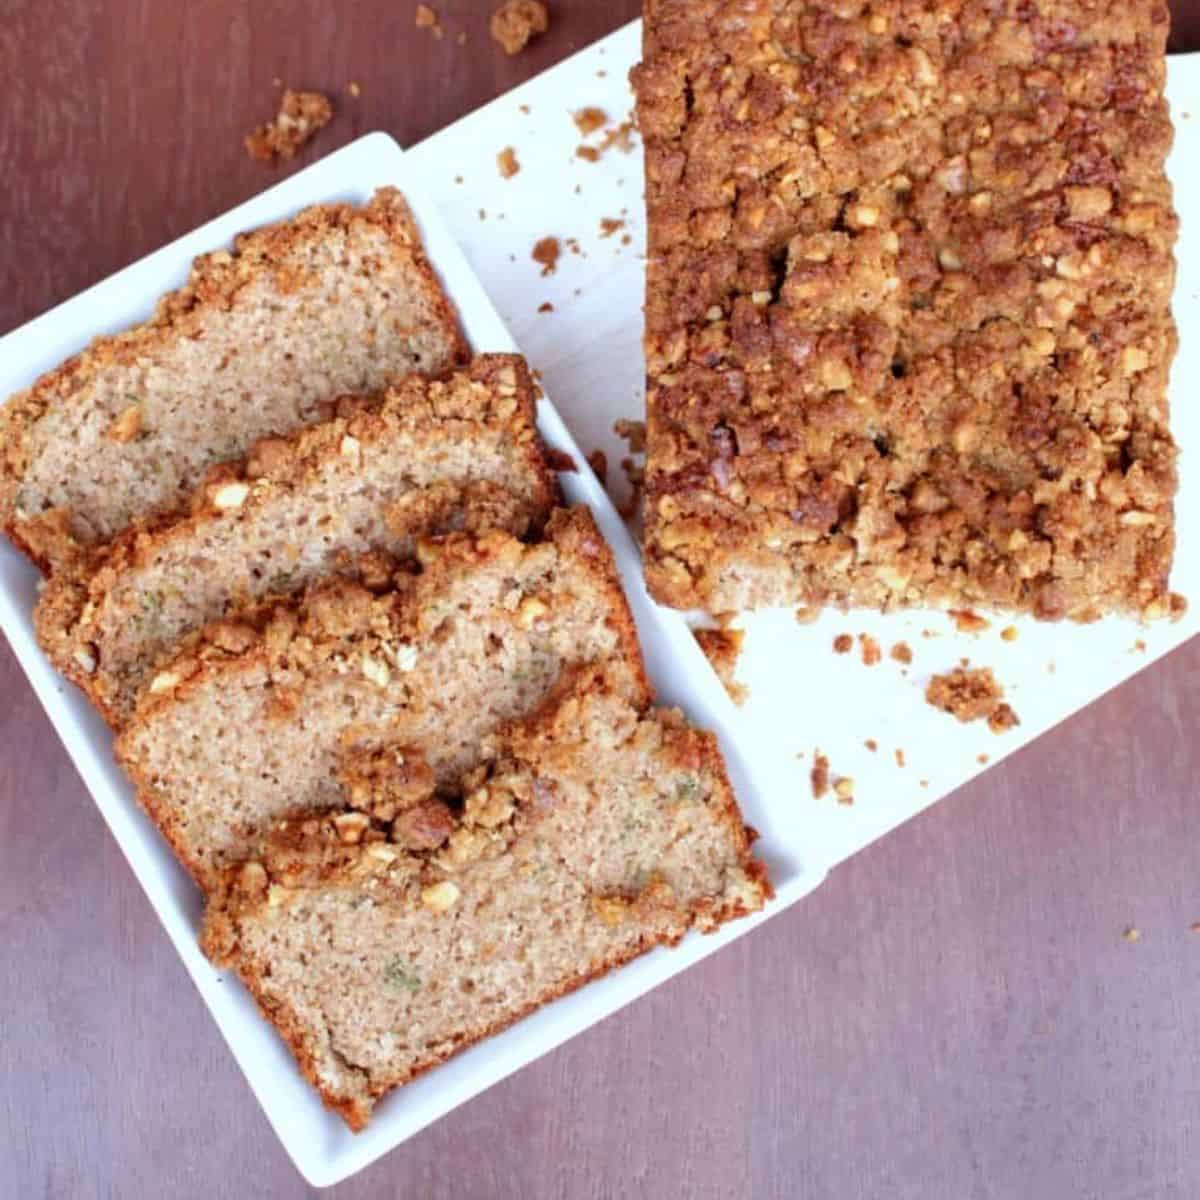 Zucchini Bread With Walnut Crumble Topping – Eggless